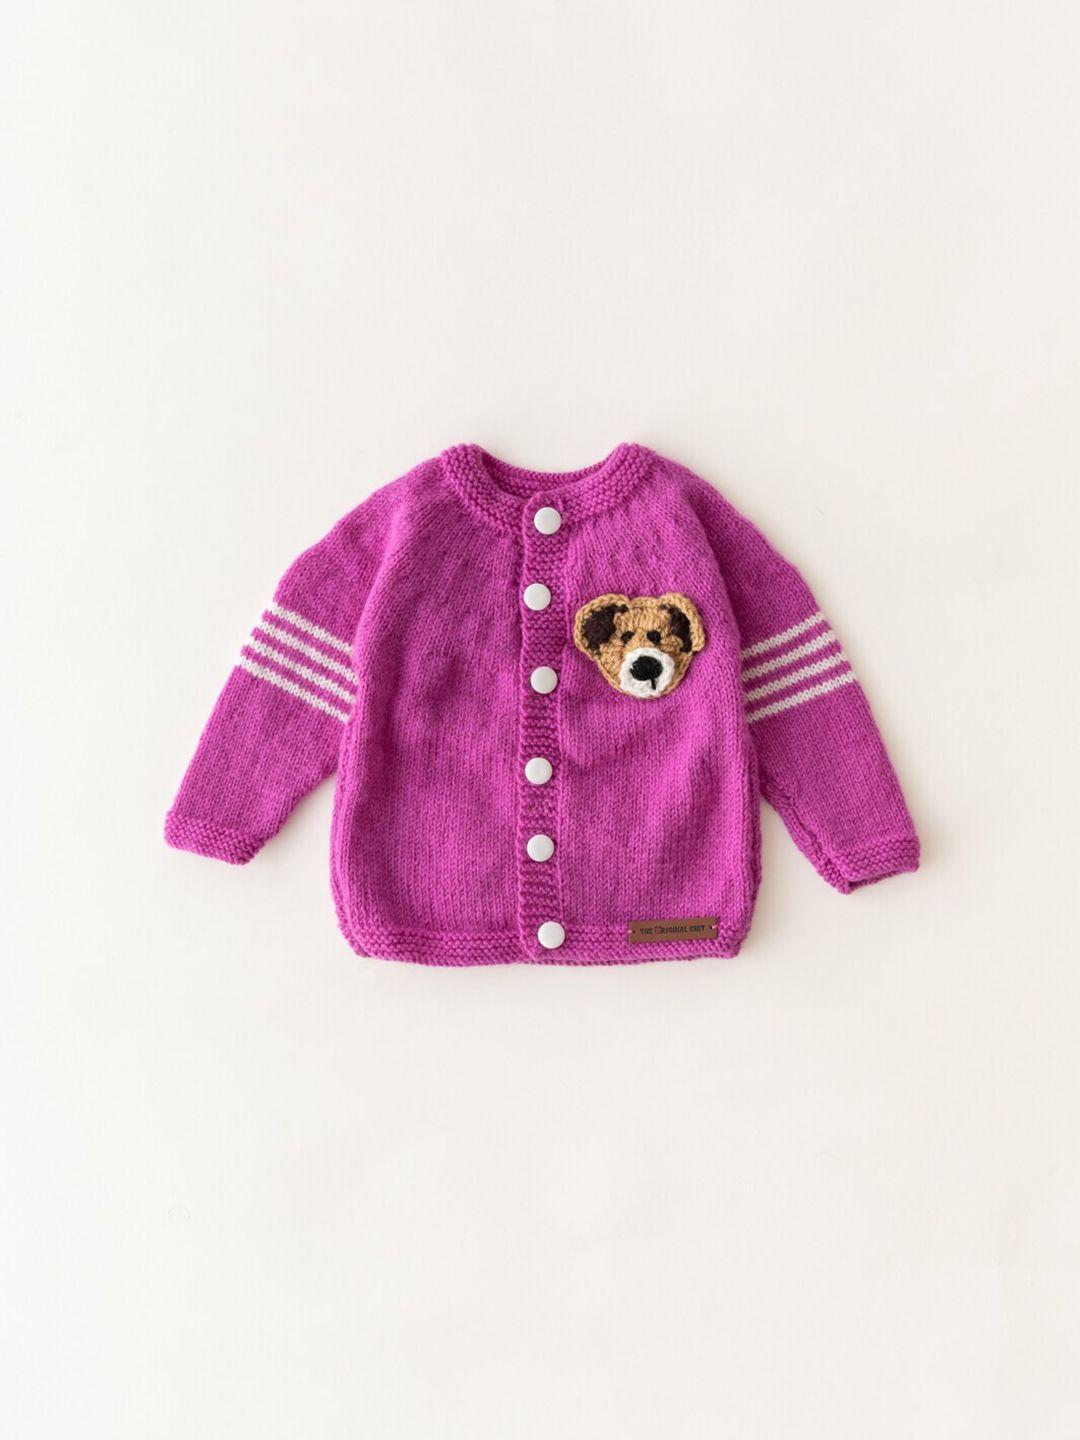 the original knit unisex kids purple & brown embroidered